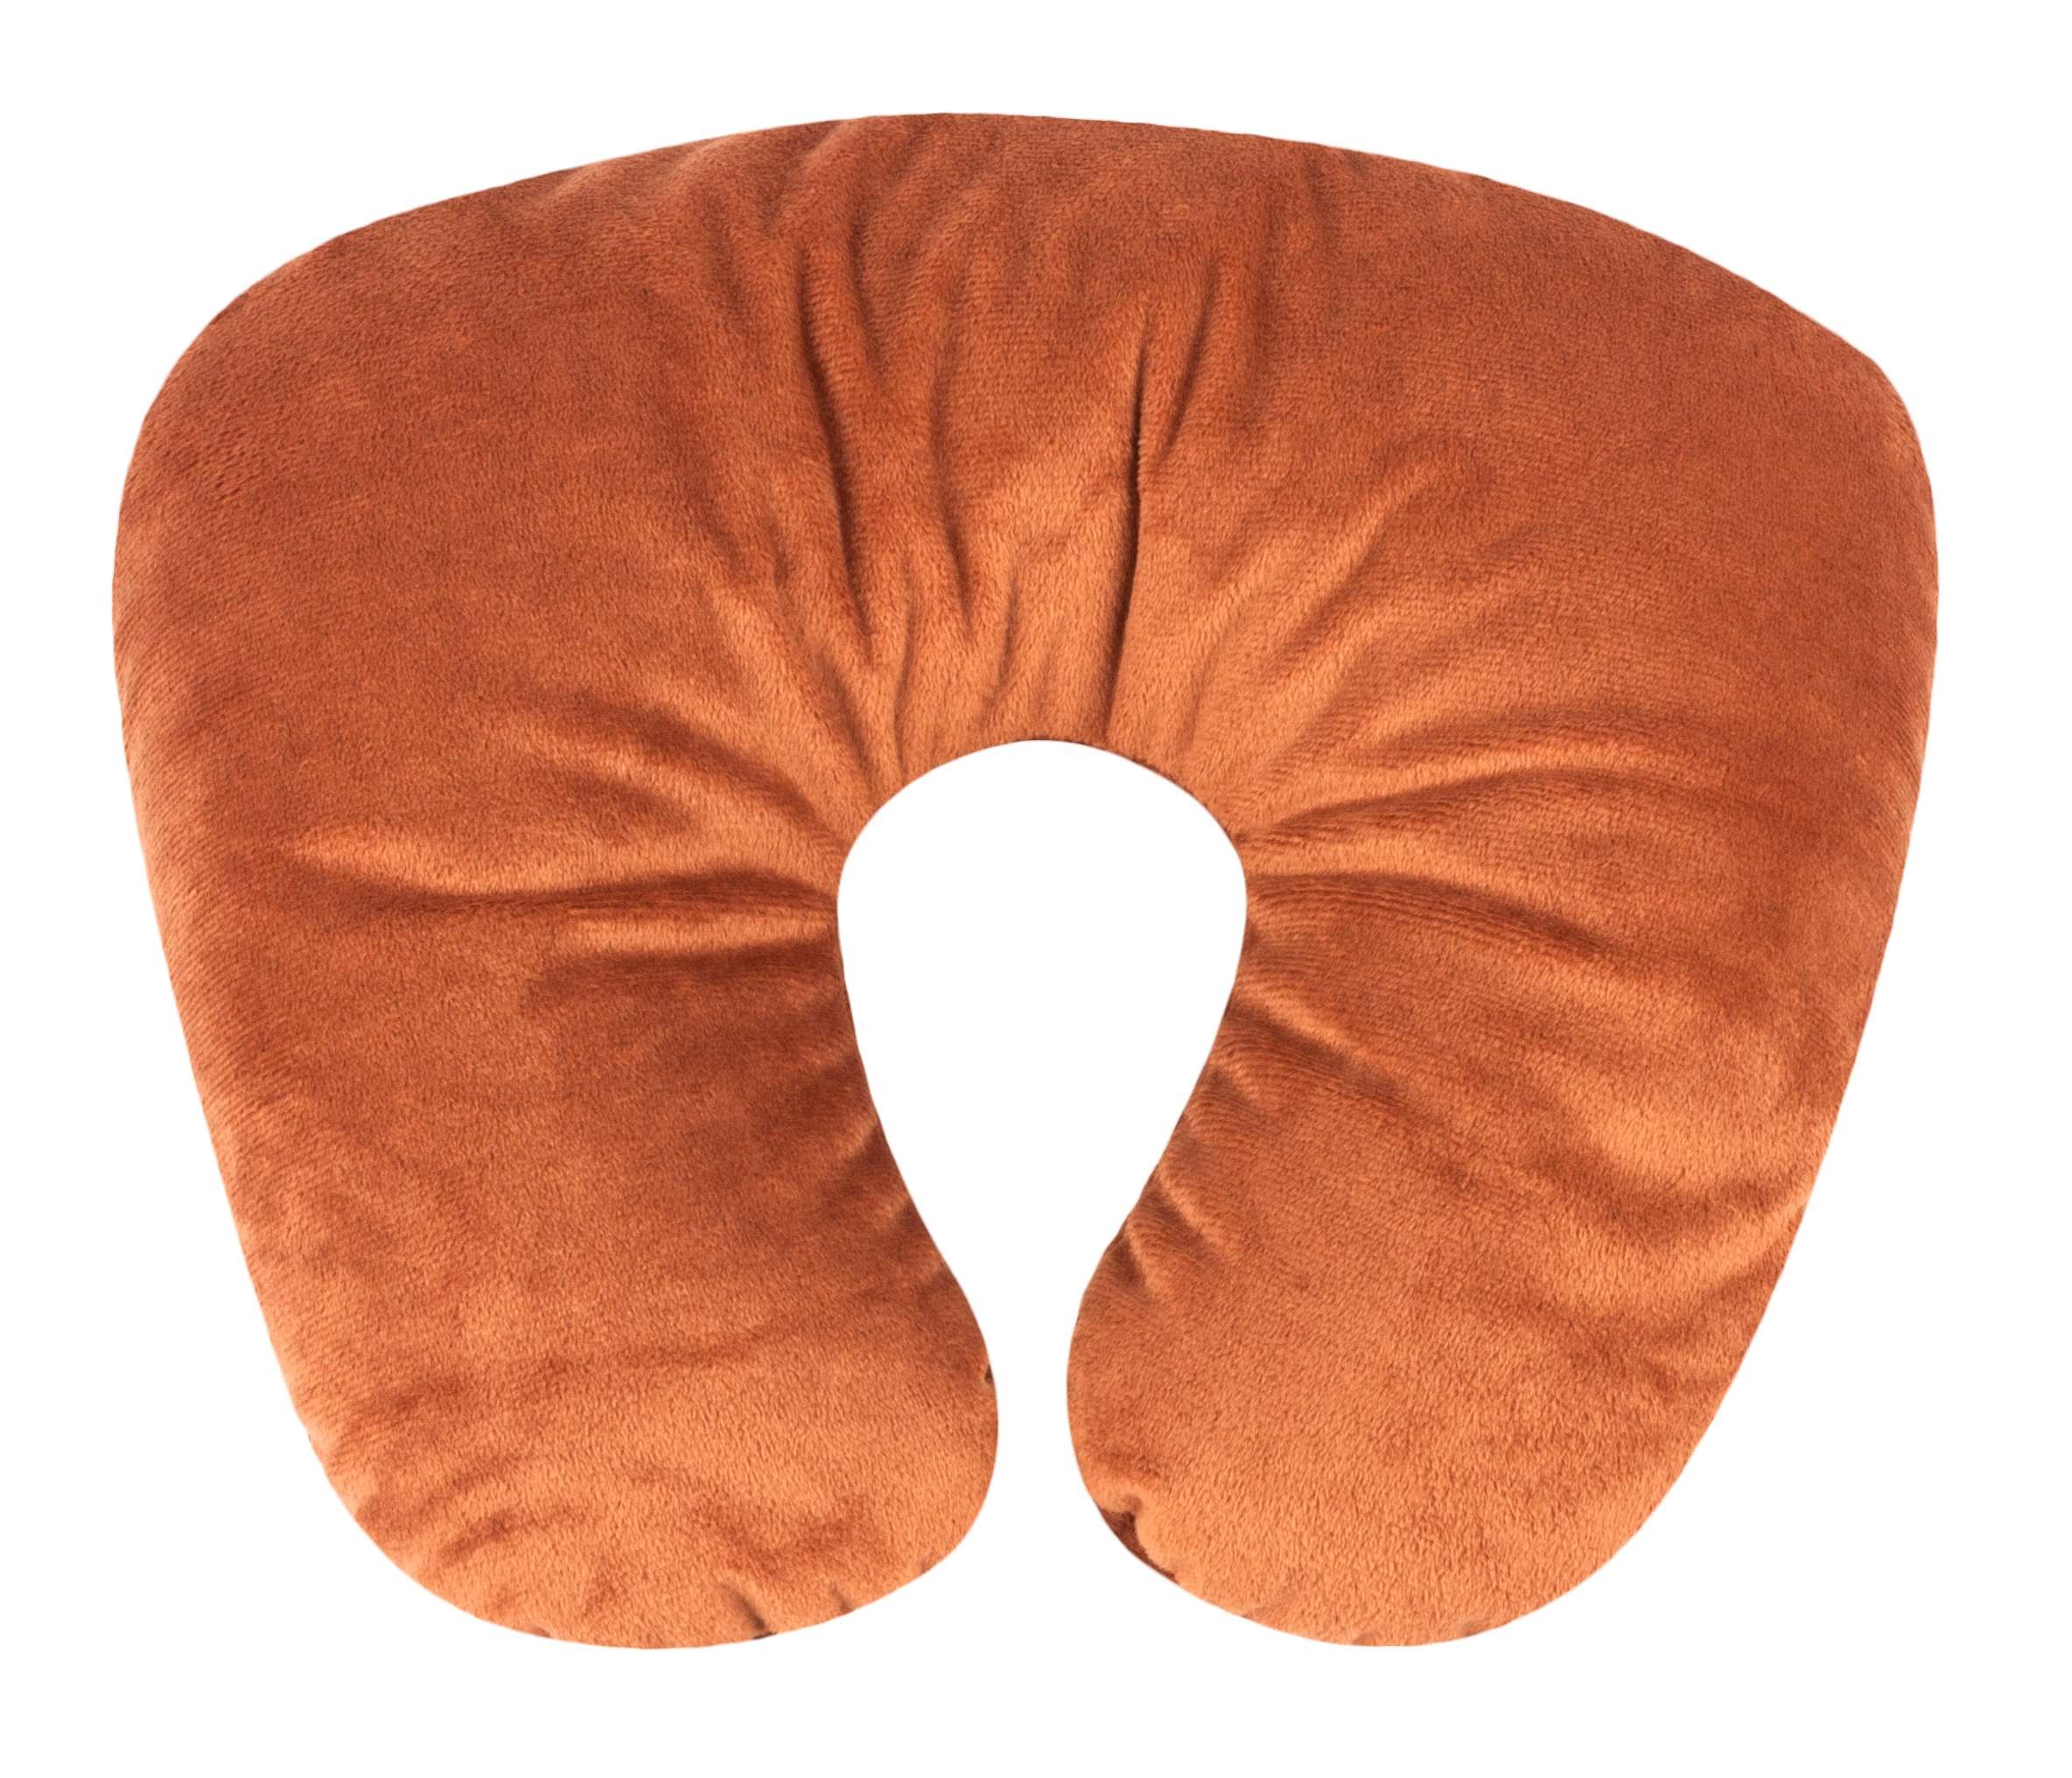 2in1 Bolster Monkey brown from 5 years